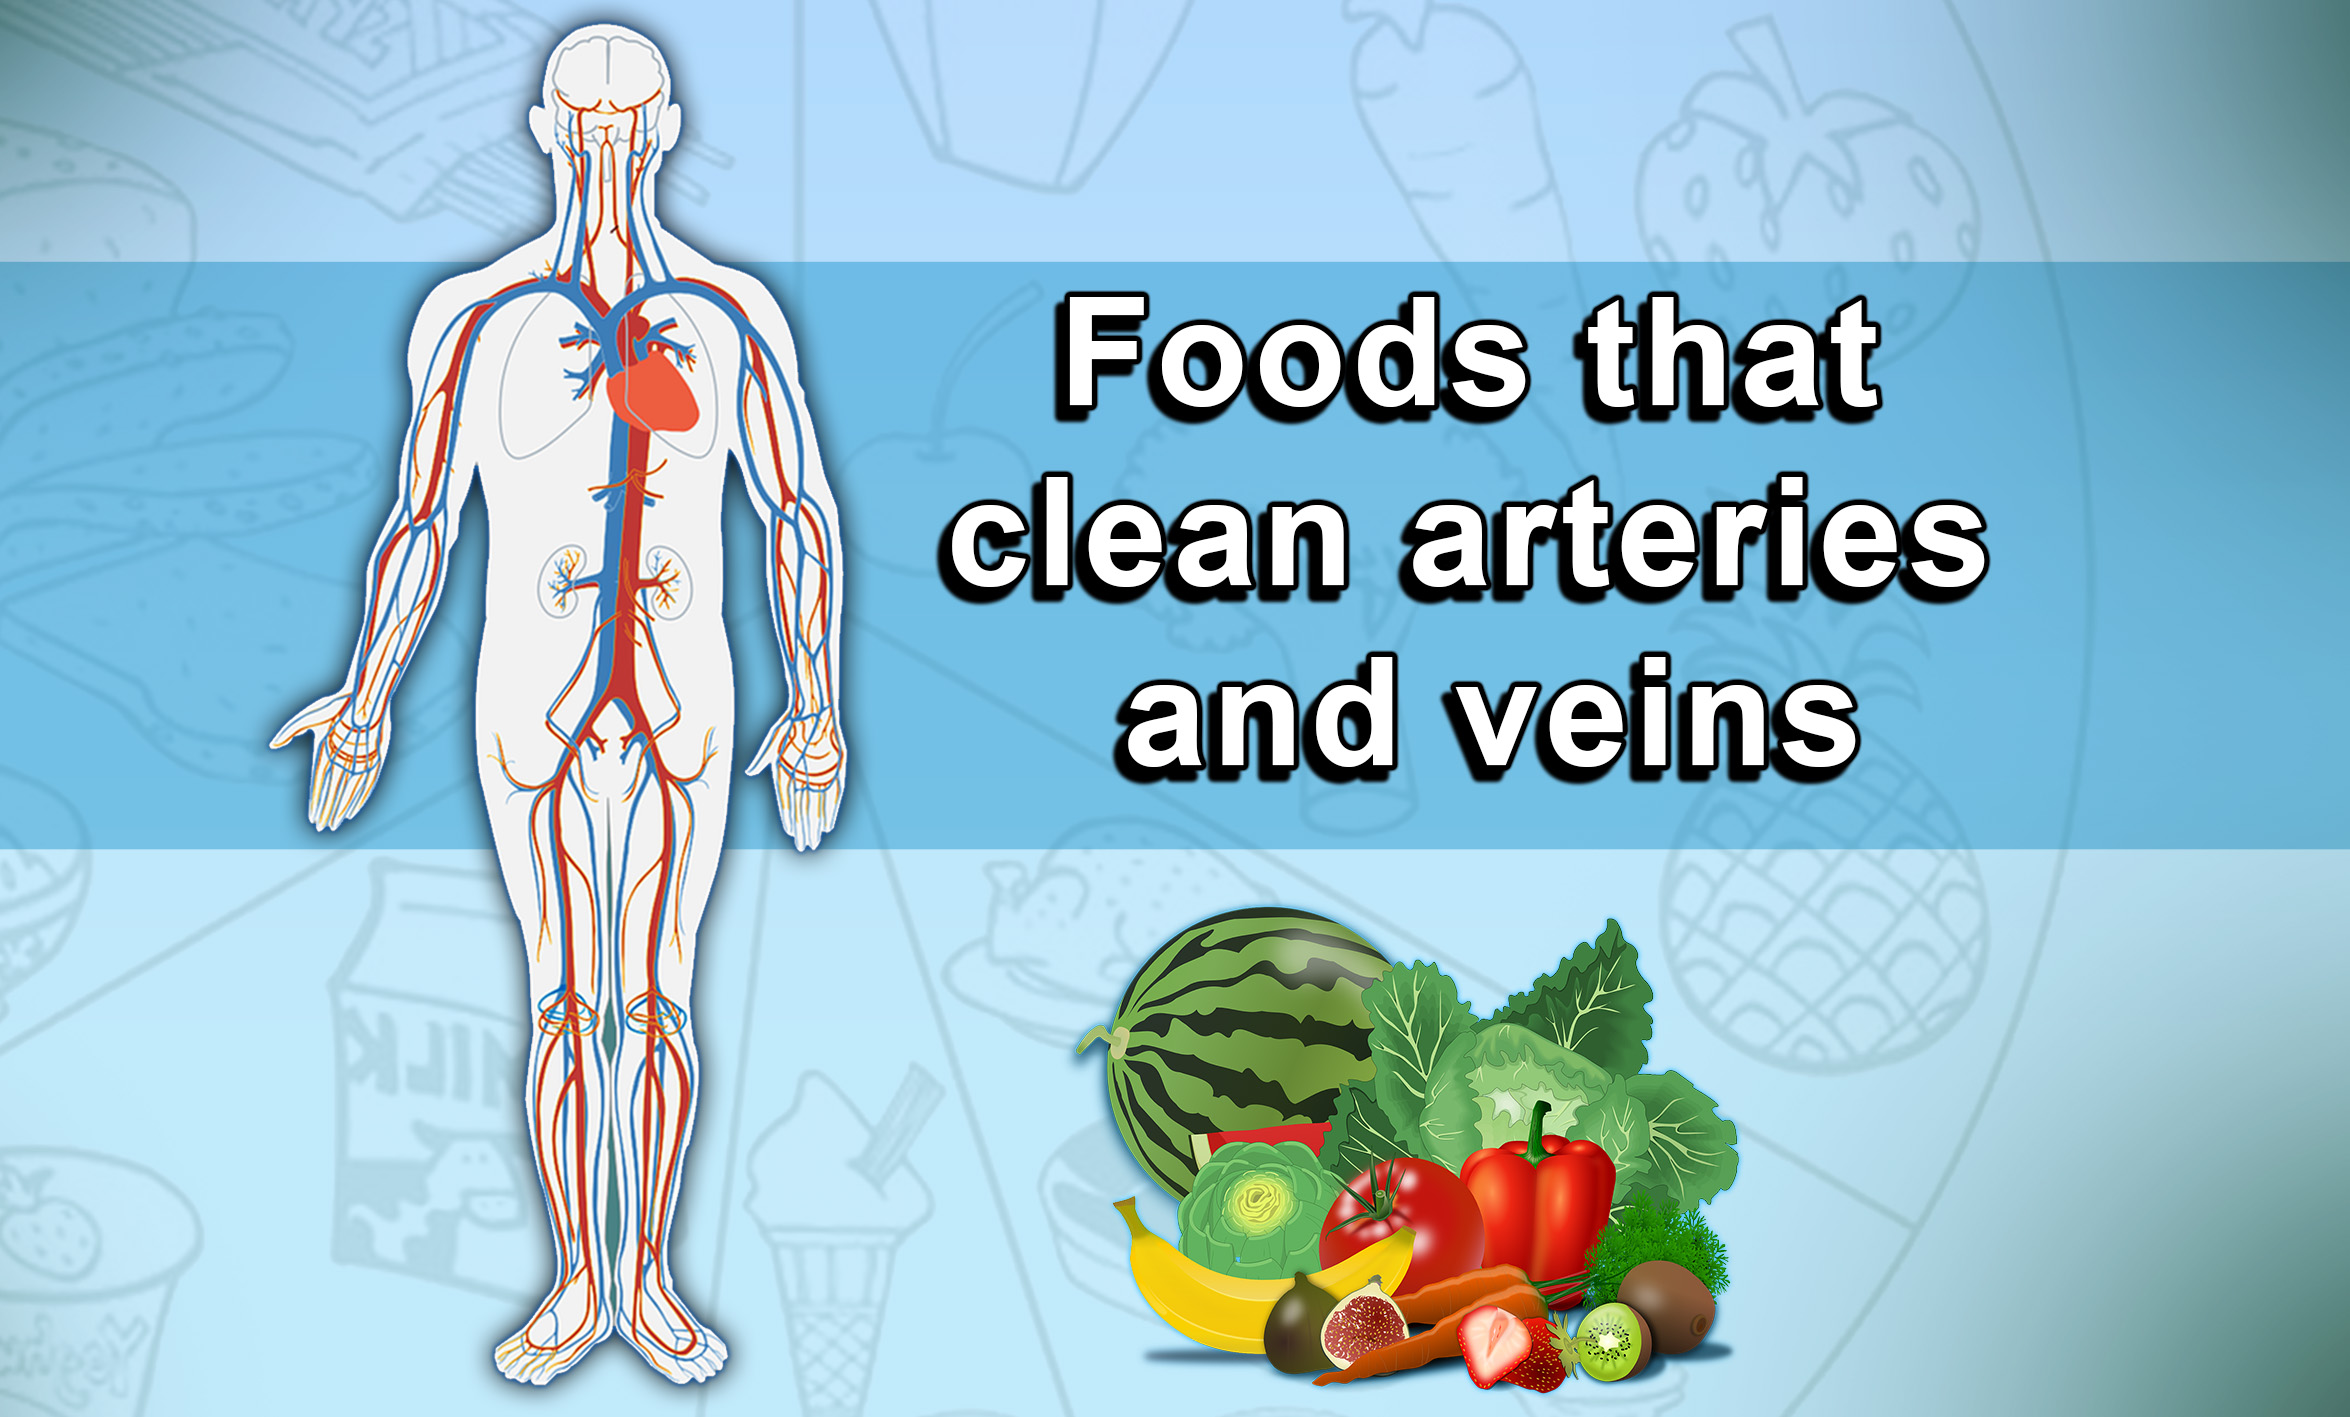 Foods that clean arteries and veins